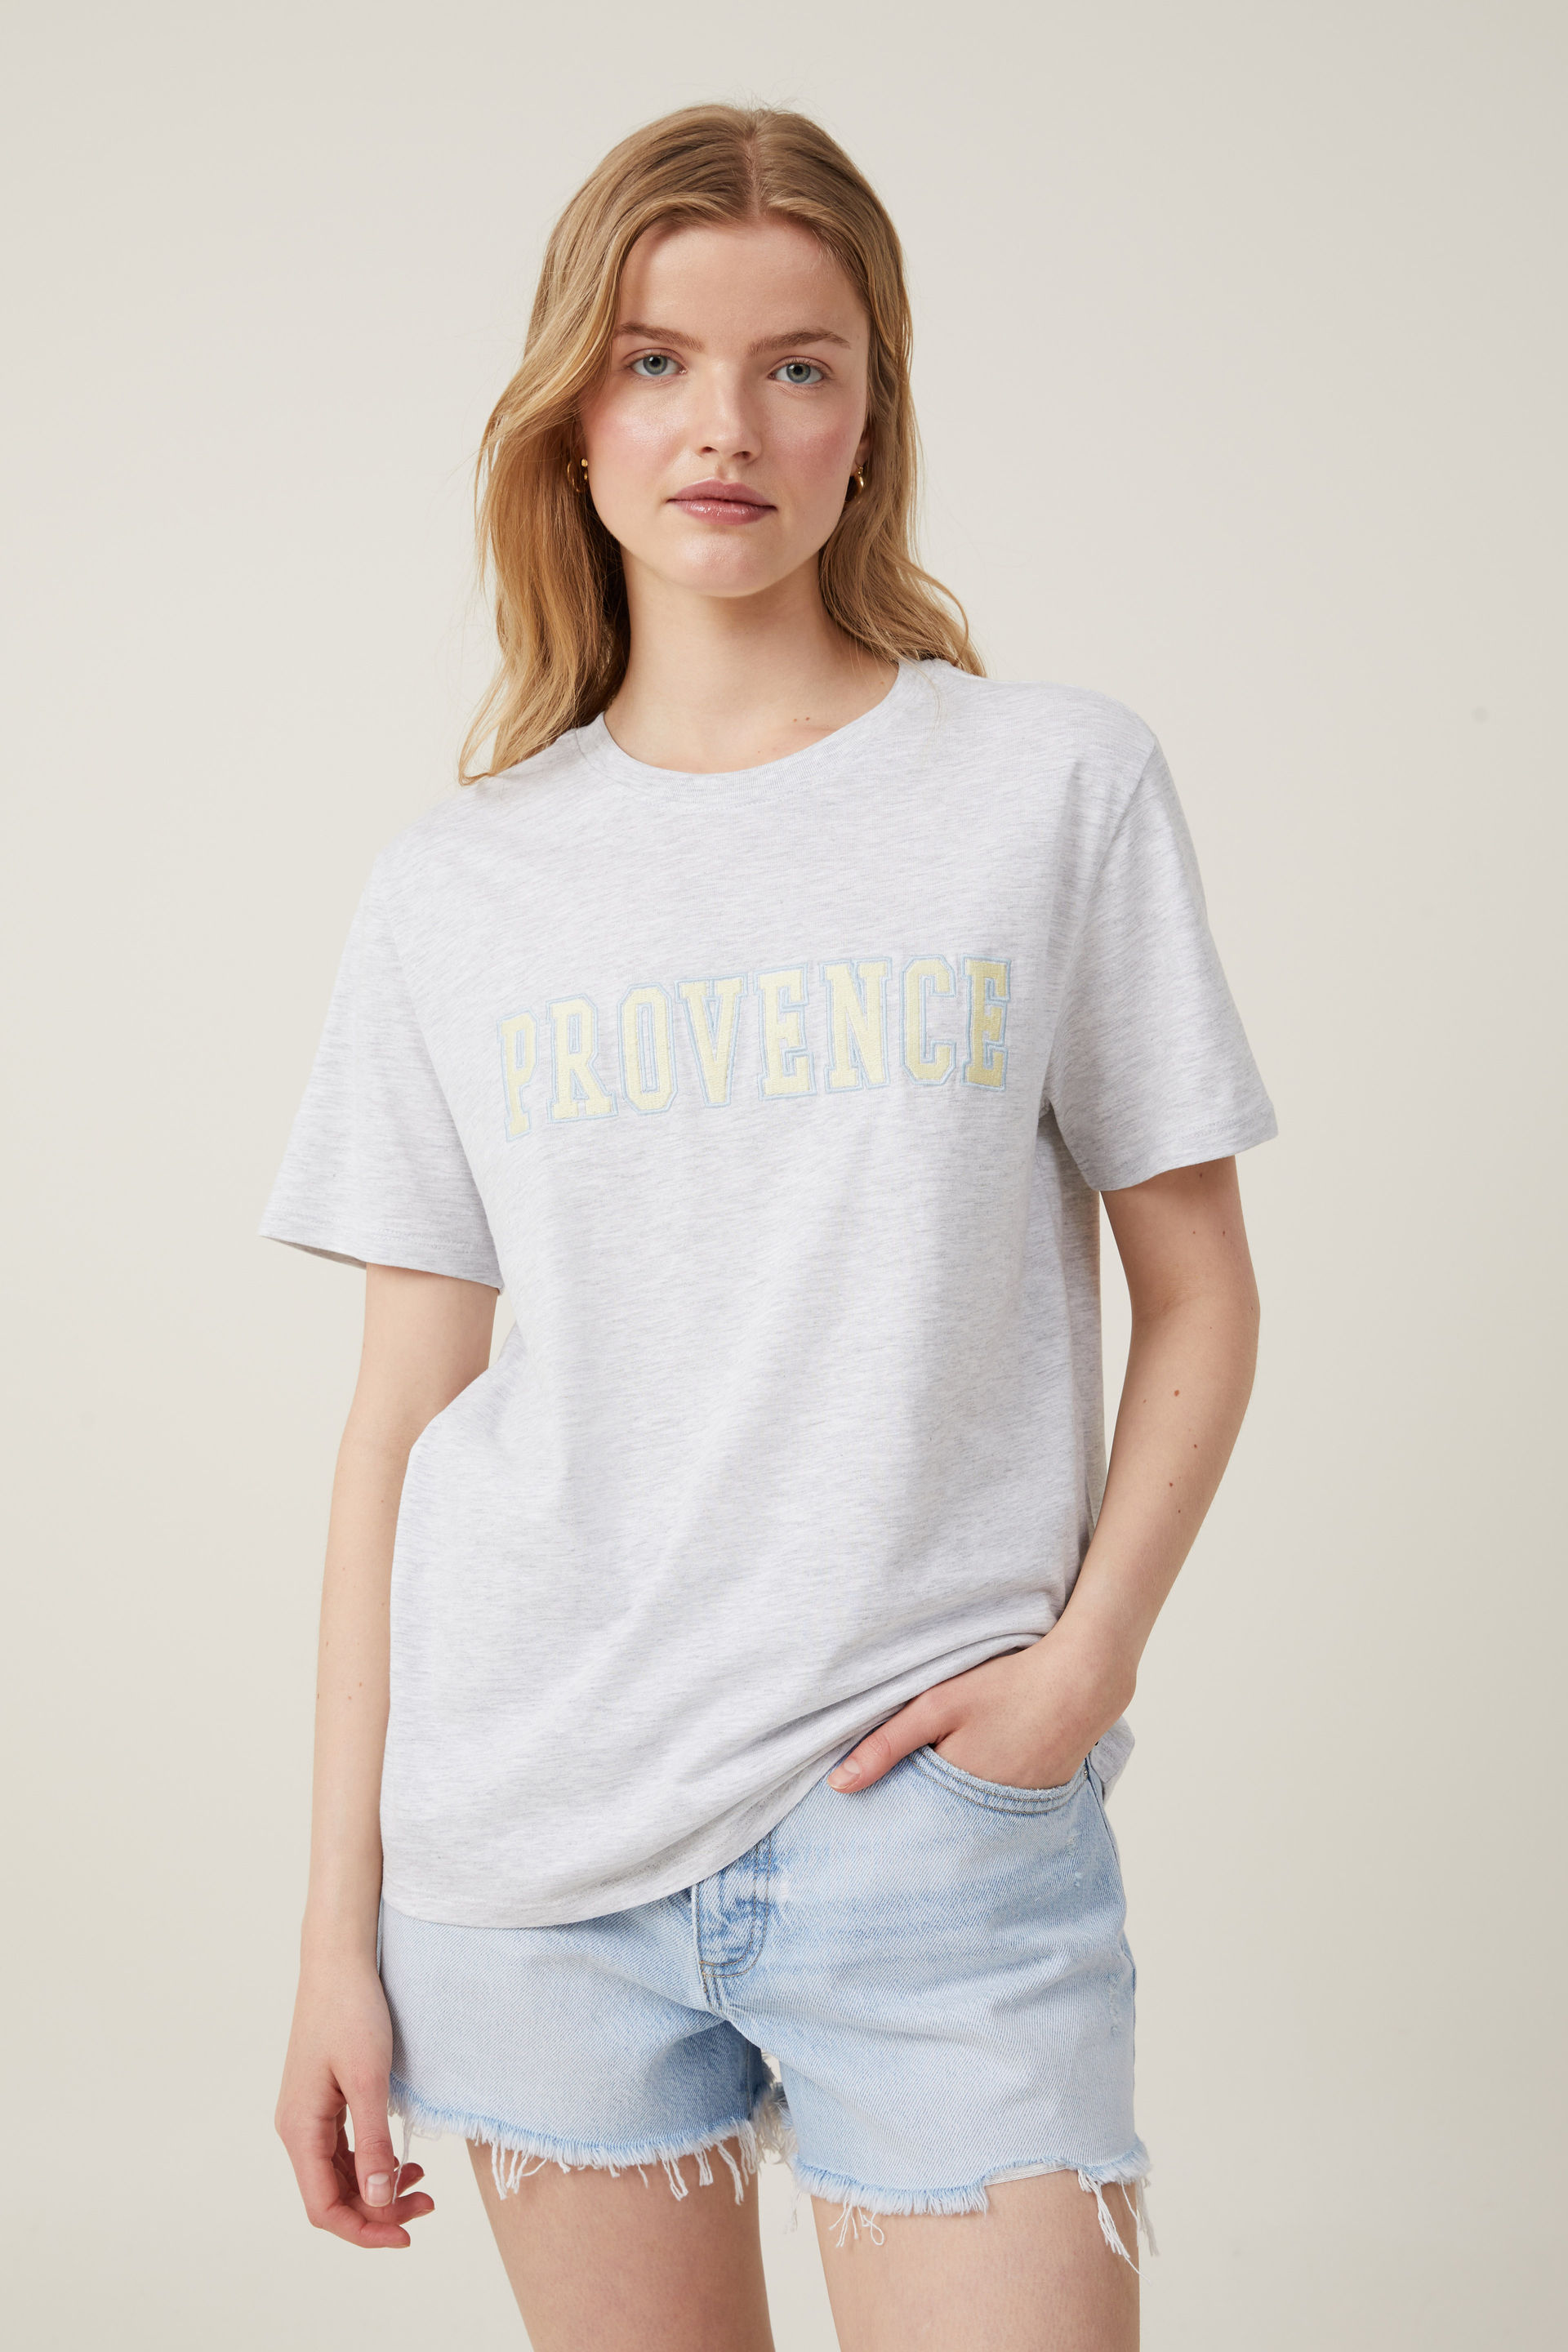 Cotton On Women - Regular Fit Graphic Tee - Provence/soft grey marle